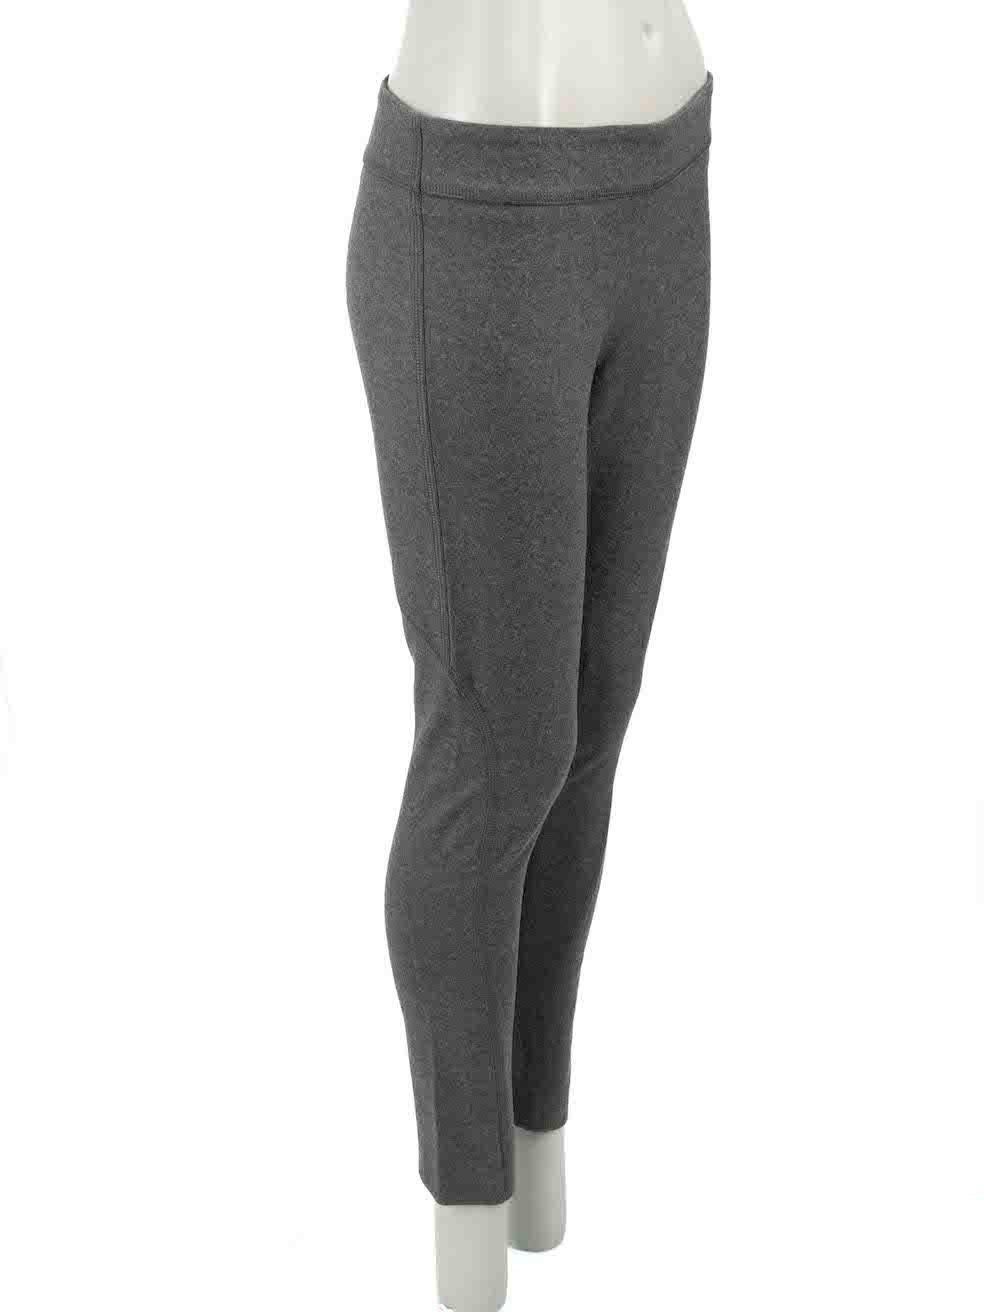 CONDITION is Very good. Hardly any visible wear to trousers is evident on this used Brunello Cucinelli designer resale item.

Details
Grey
Wool
Leggings
Mid rise
Contrast knit panel
Side zip closure with button
Made in Italy 

Composition
89% Wool,